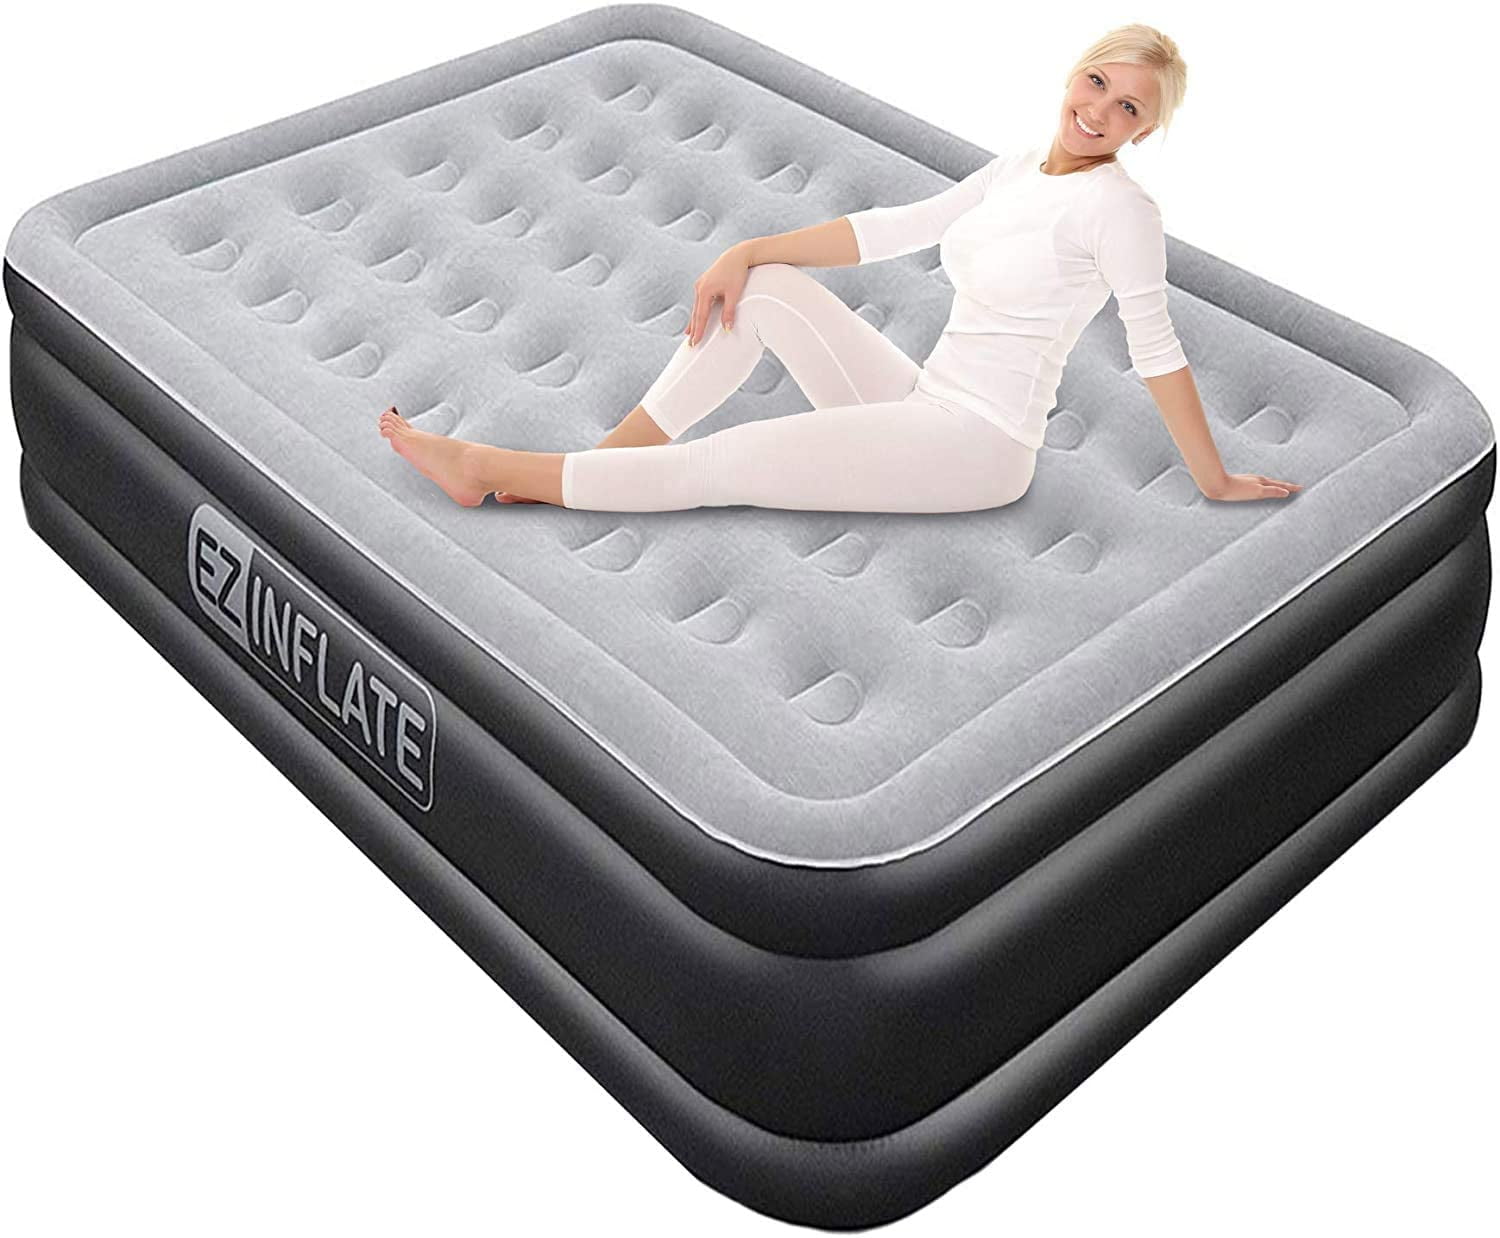 EZ INFLATE Luxury Double High Queen air Mattress with Built in Pump, Queen Size, Inflatable